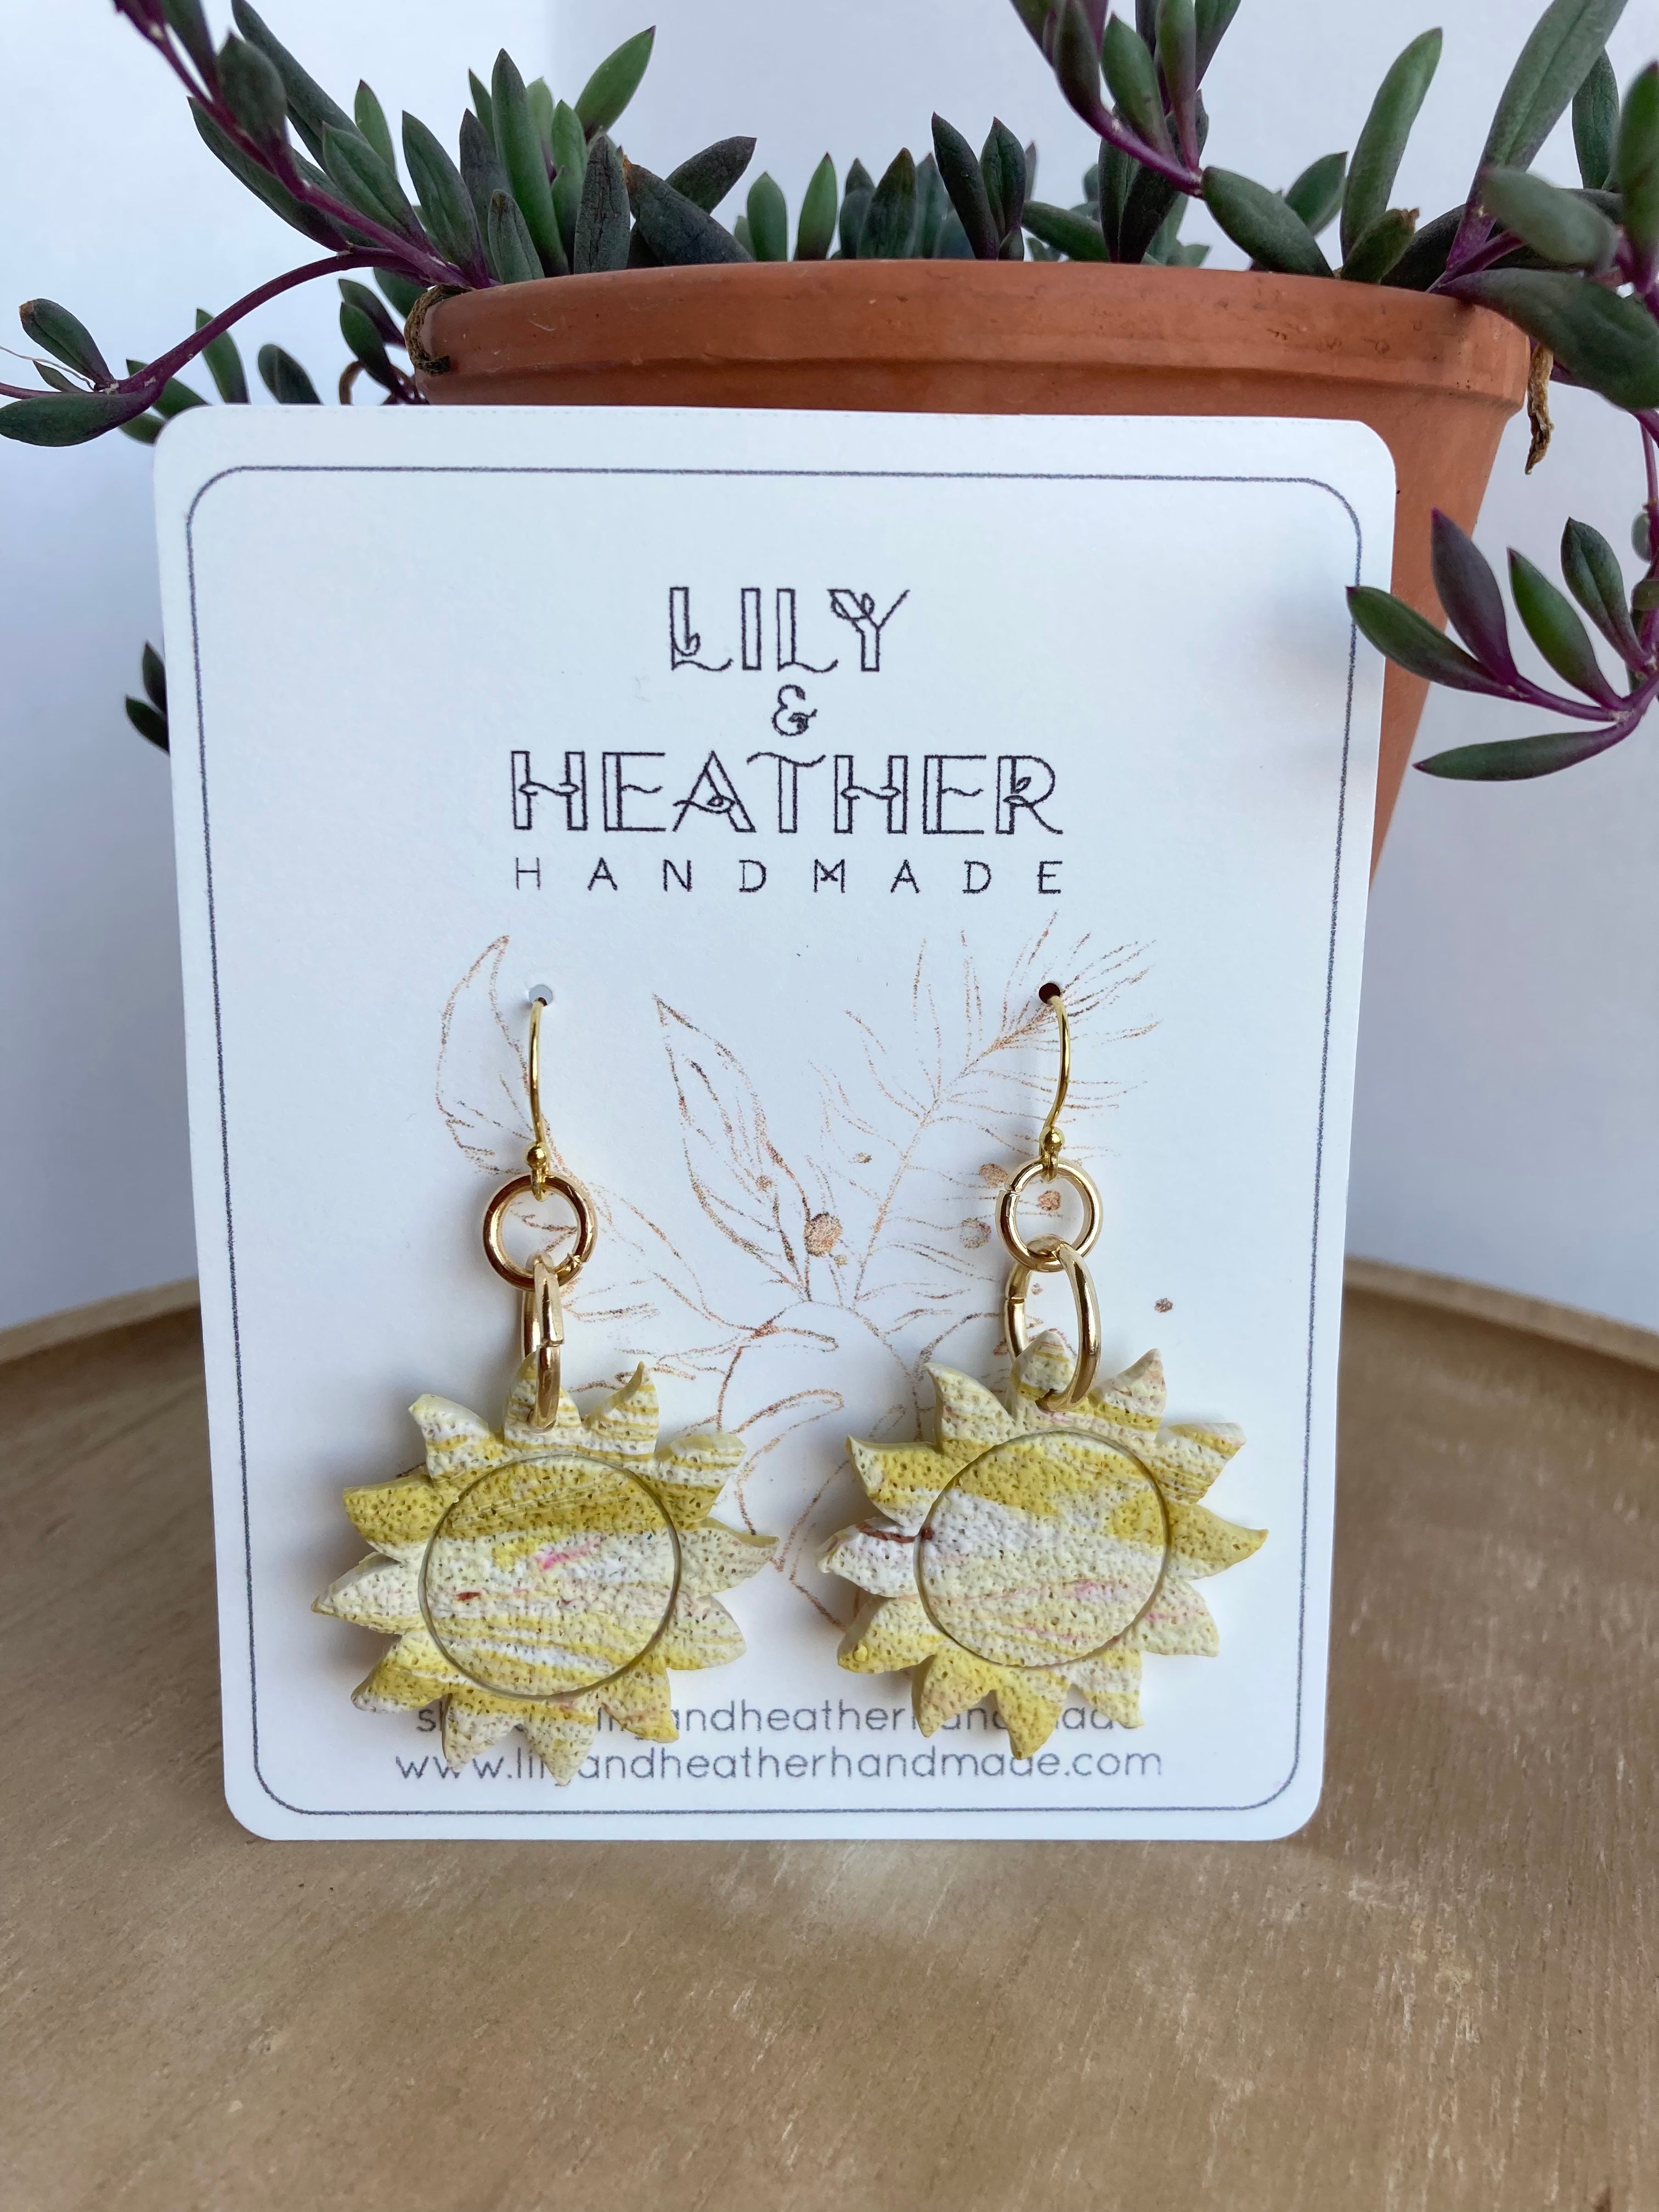 Earrings from Lily & Heather Handmade